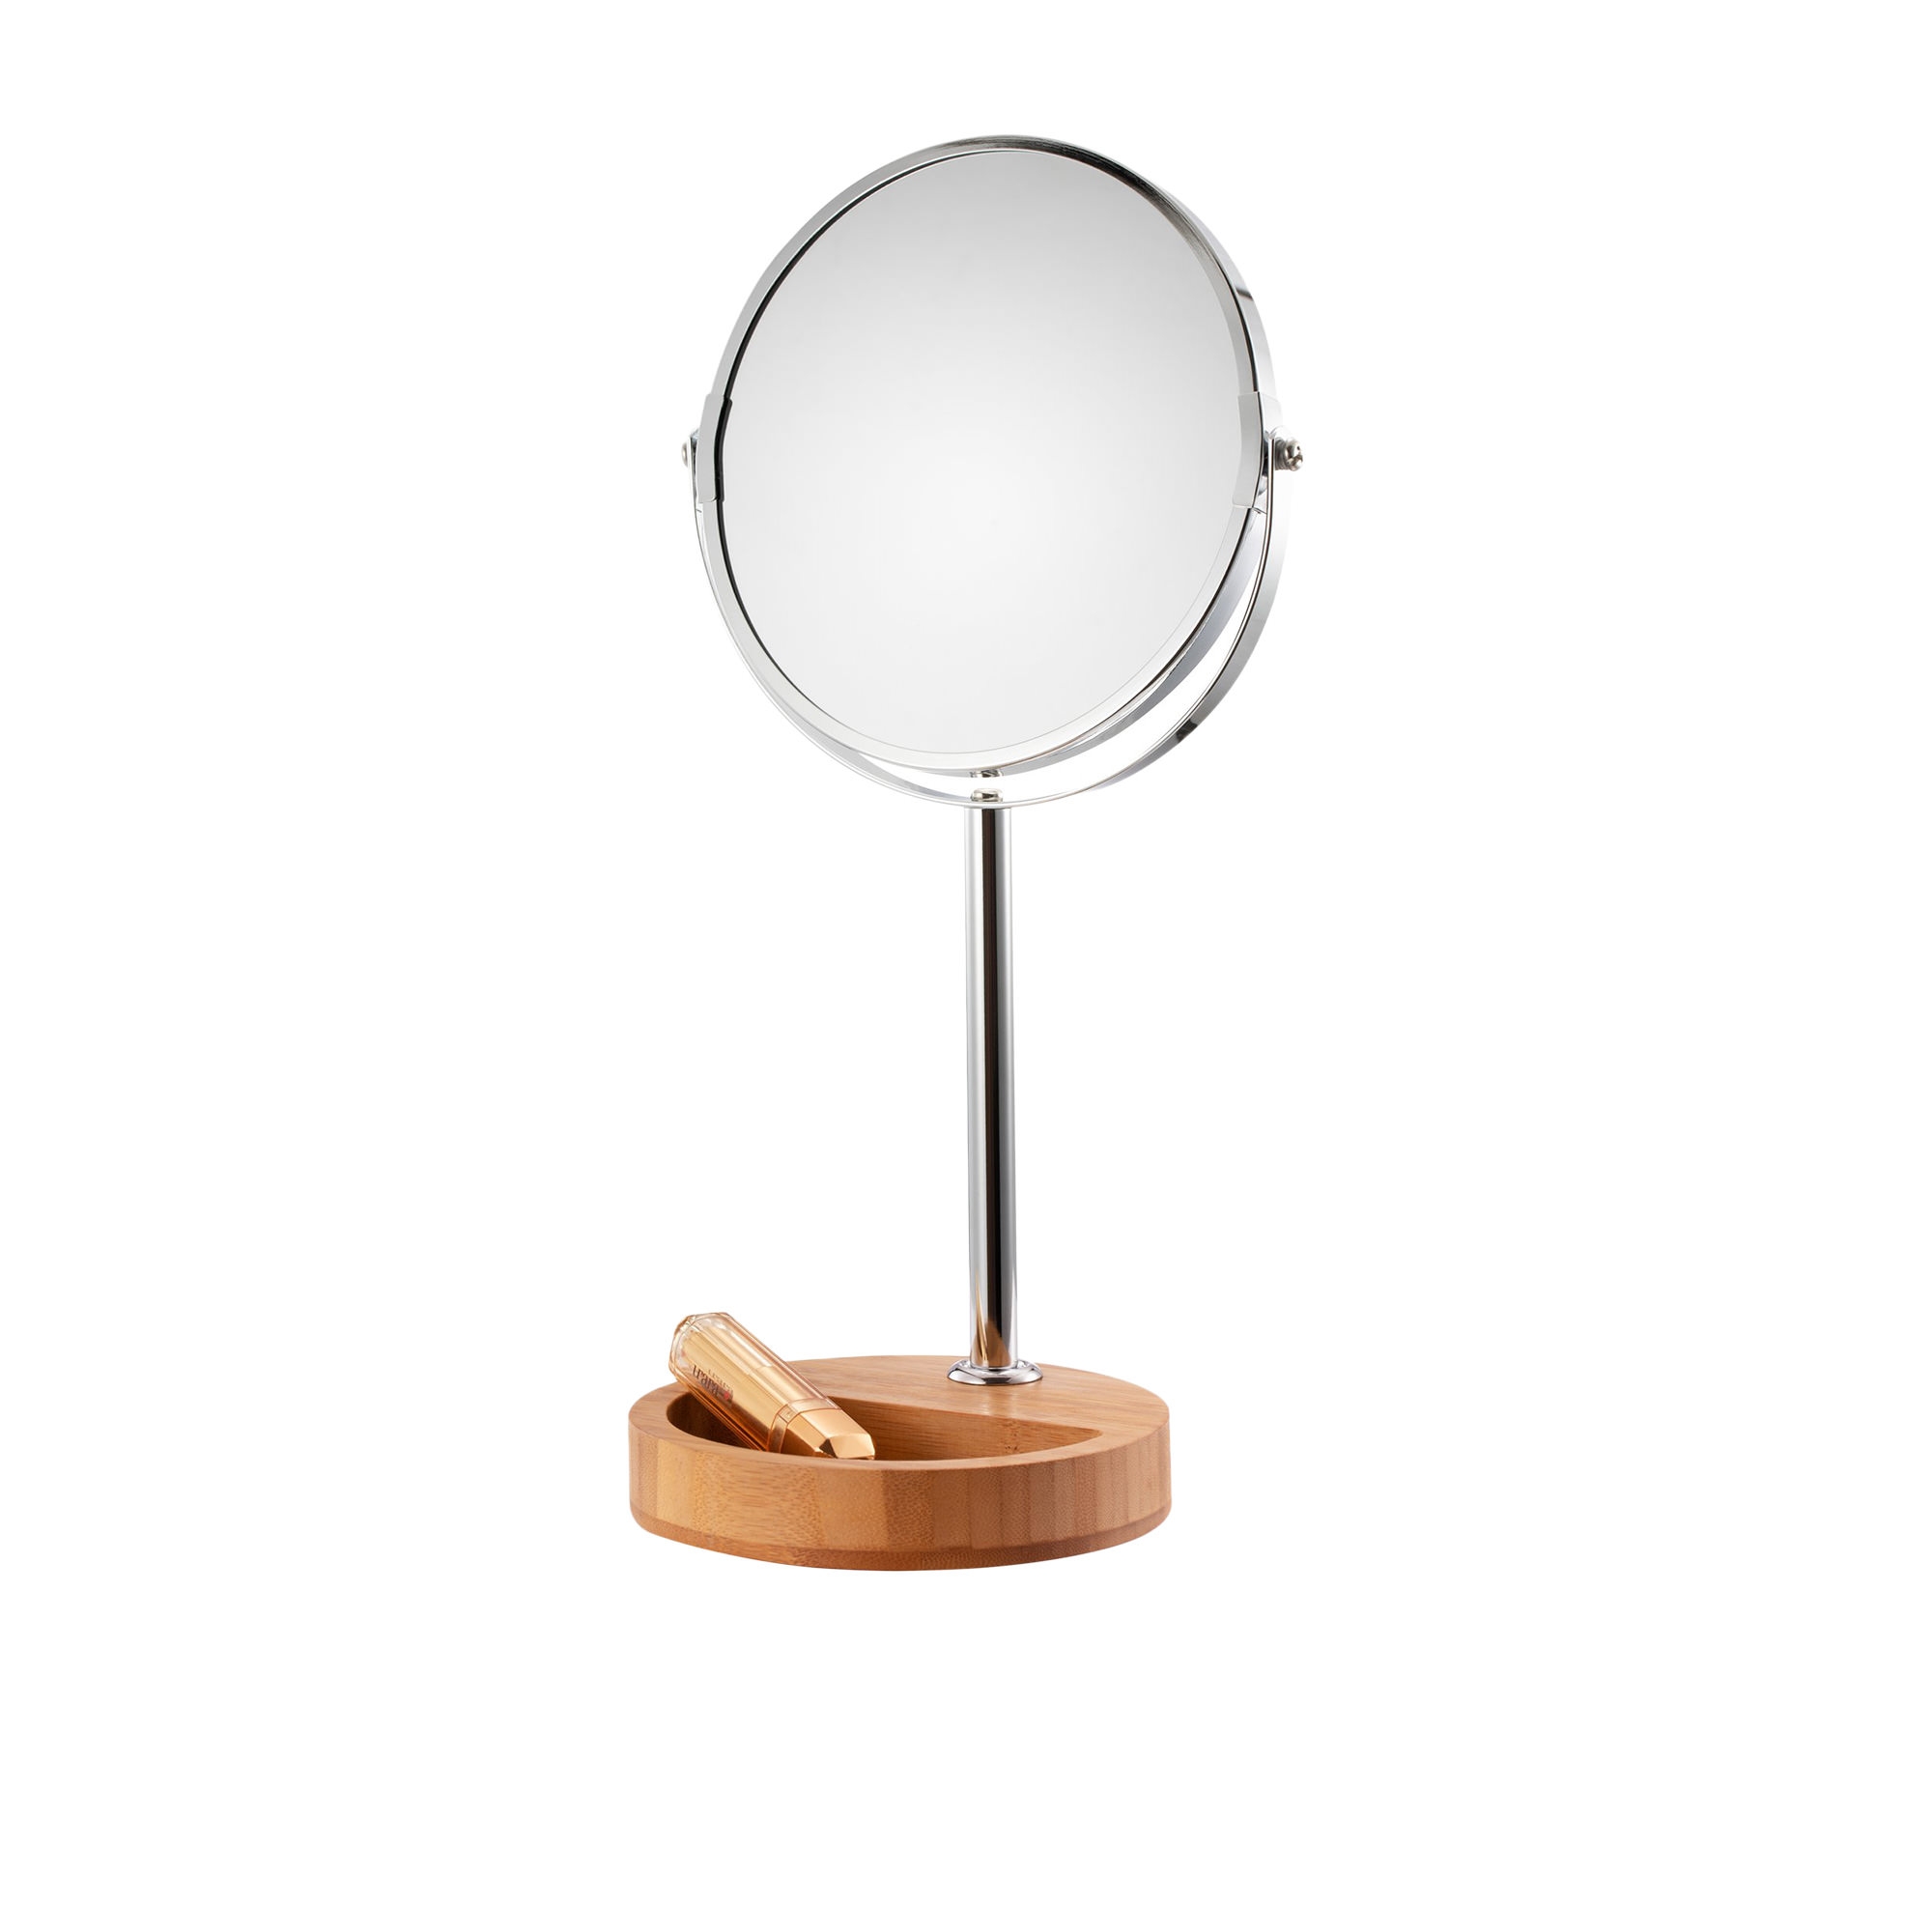 Clevinger Verona Round Vanity Mirror with Bamboo Base Silver Image 1